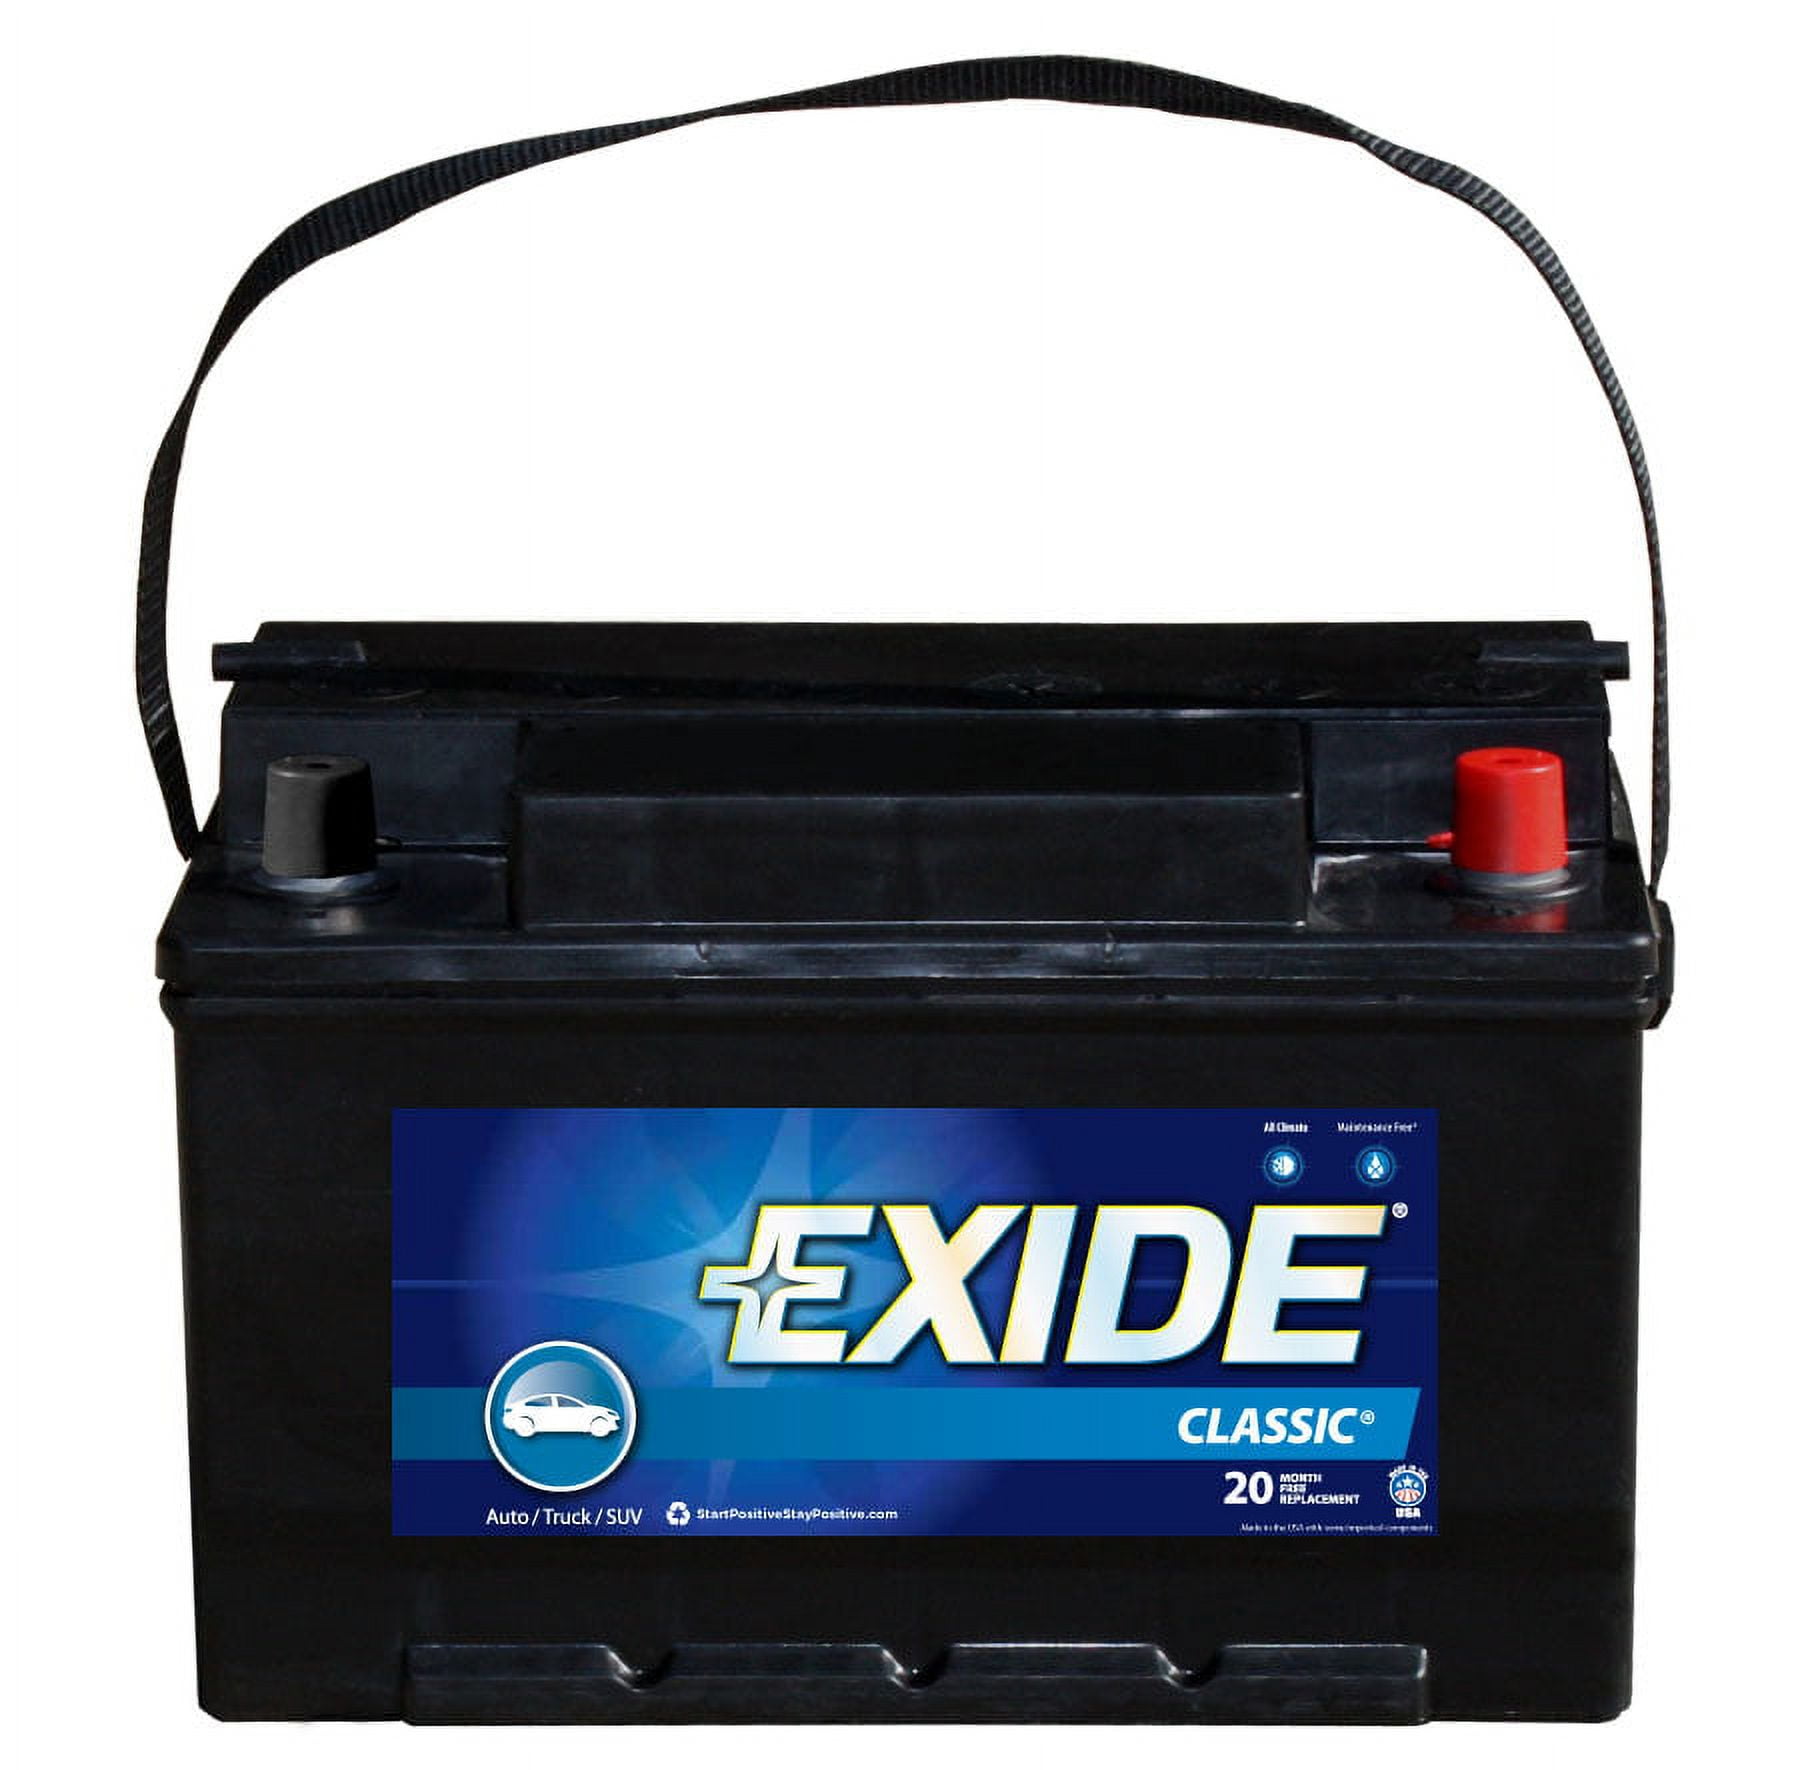 Finding the correct car battery is half the battle: Exide unveils new  Battery Finder features